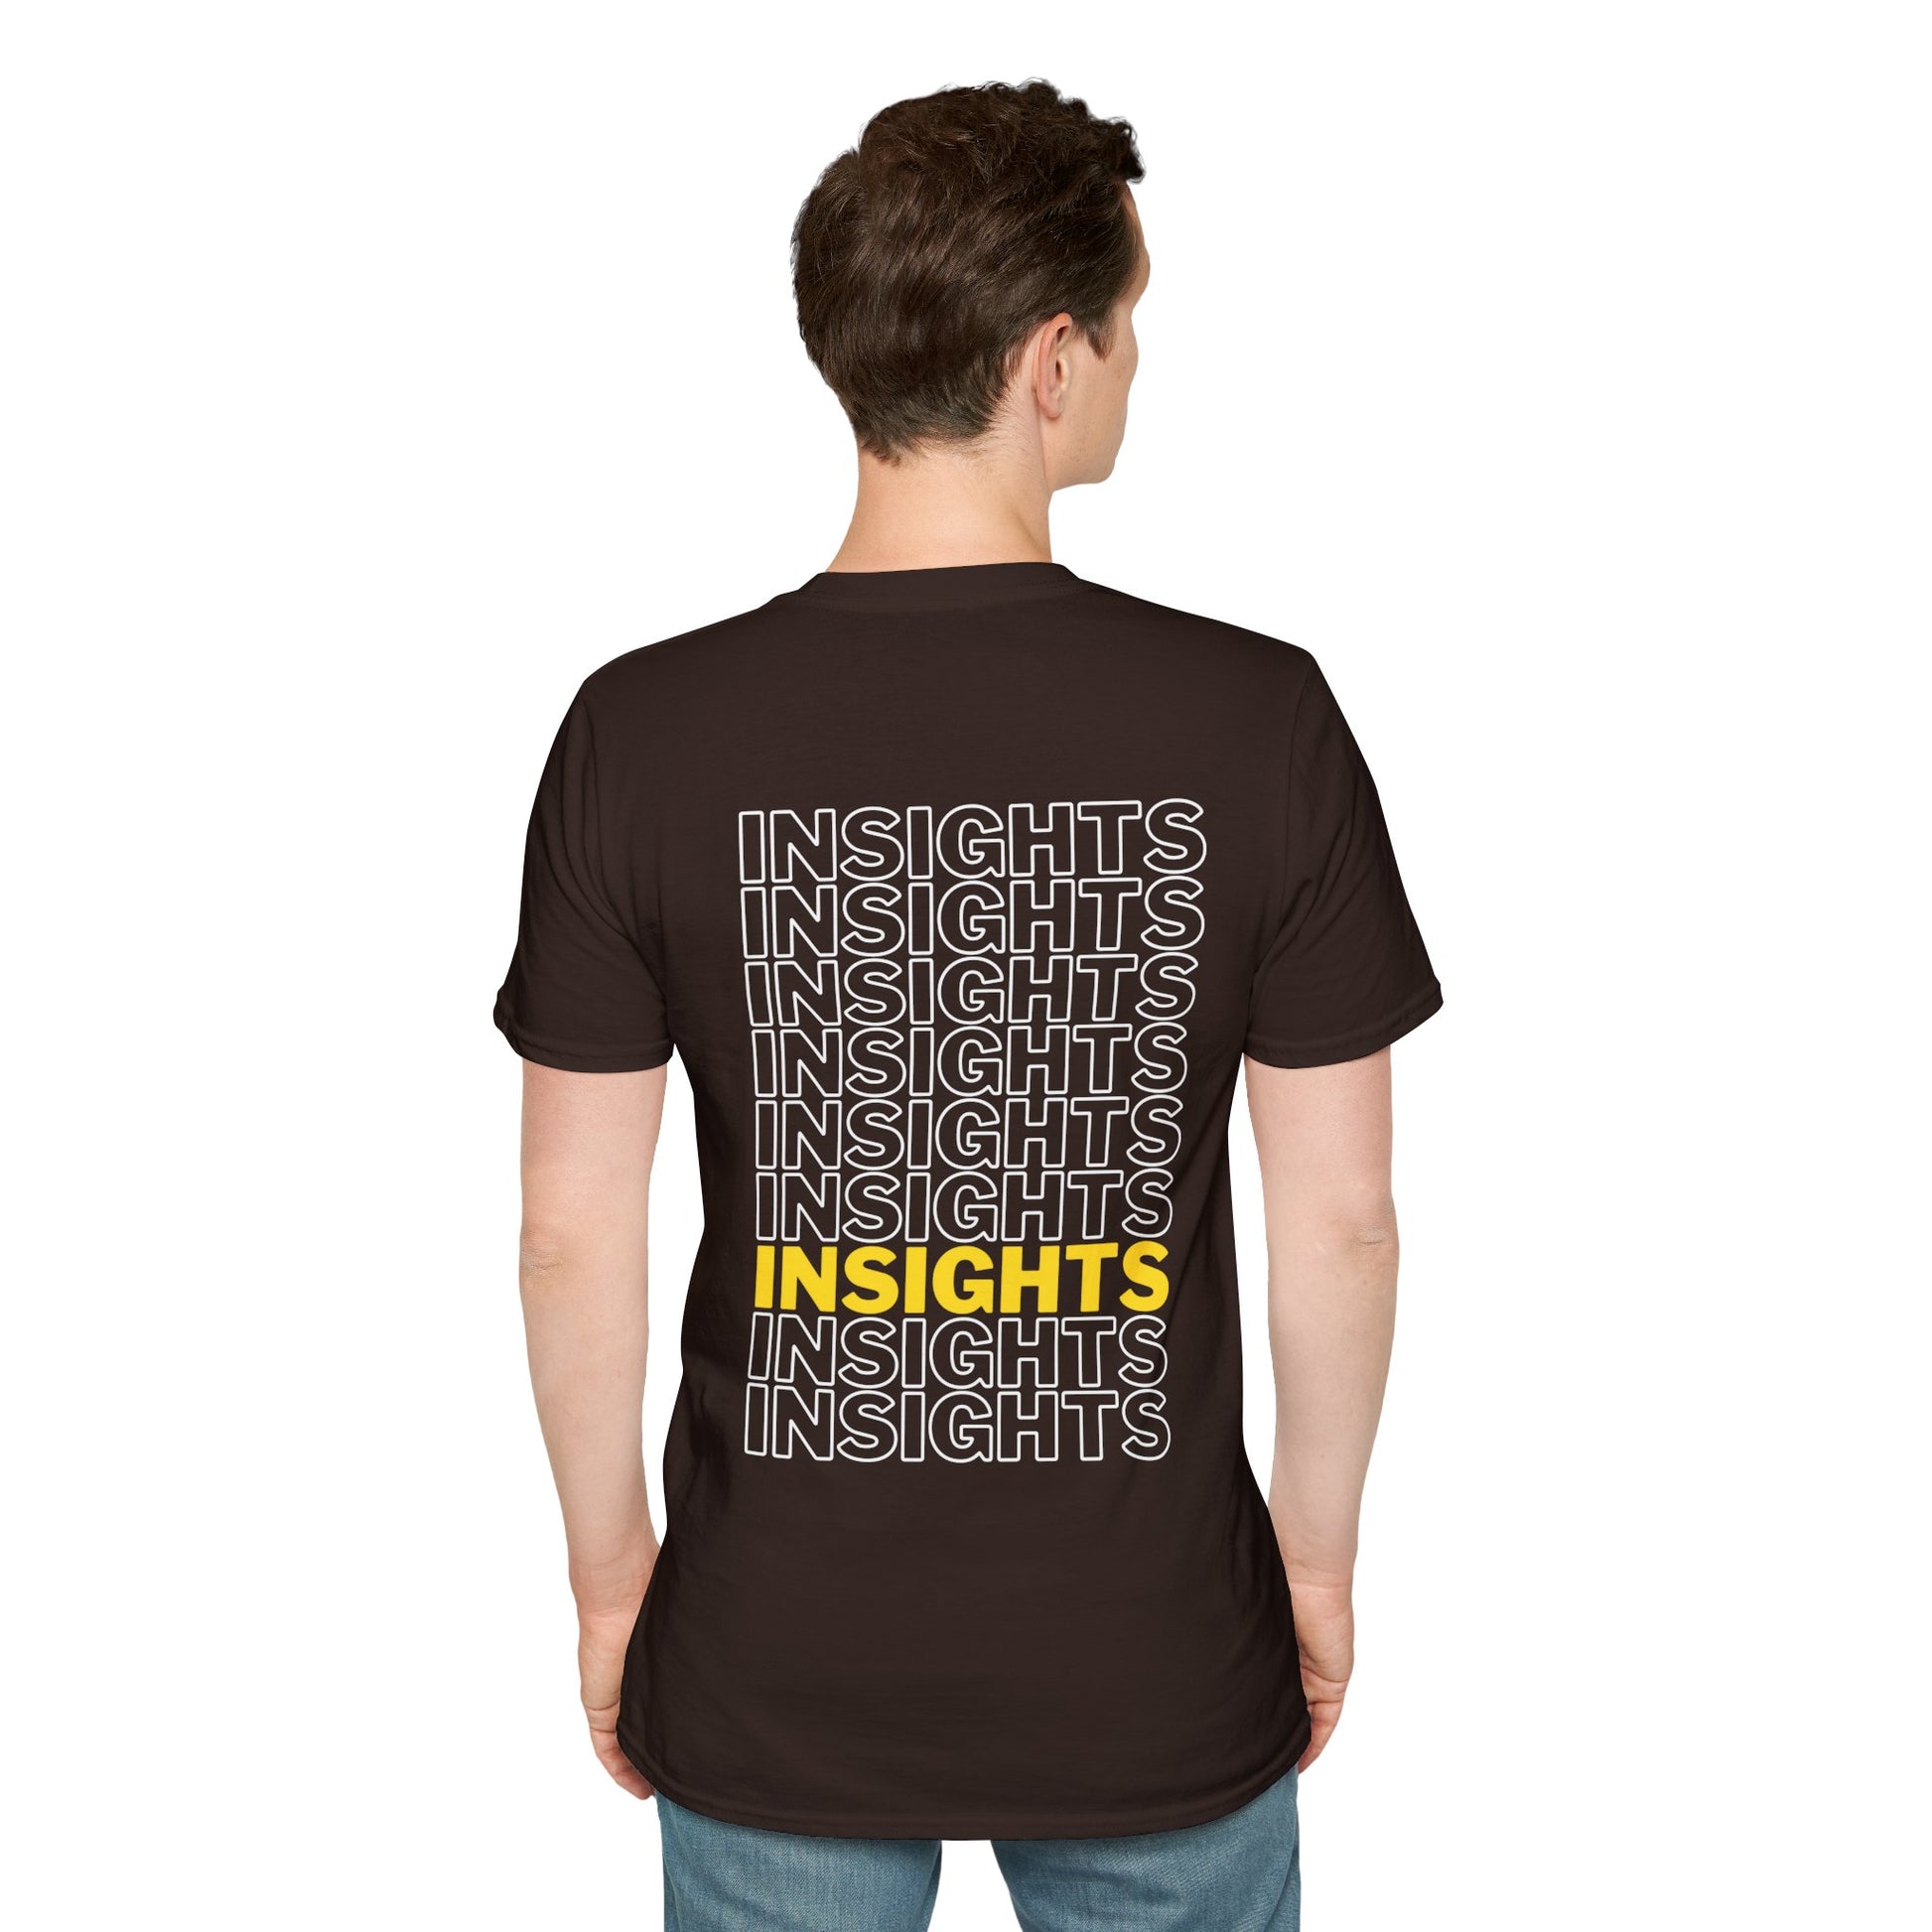 Brown T-shirt with the word ‘INSIGHTS’ repeated in white text and one instance highlighted in yellow